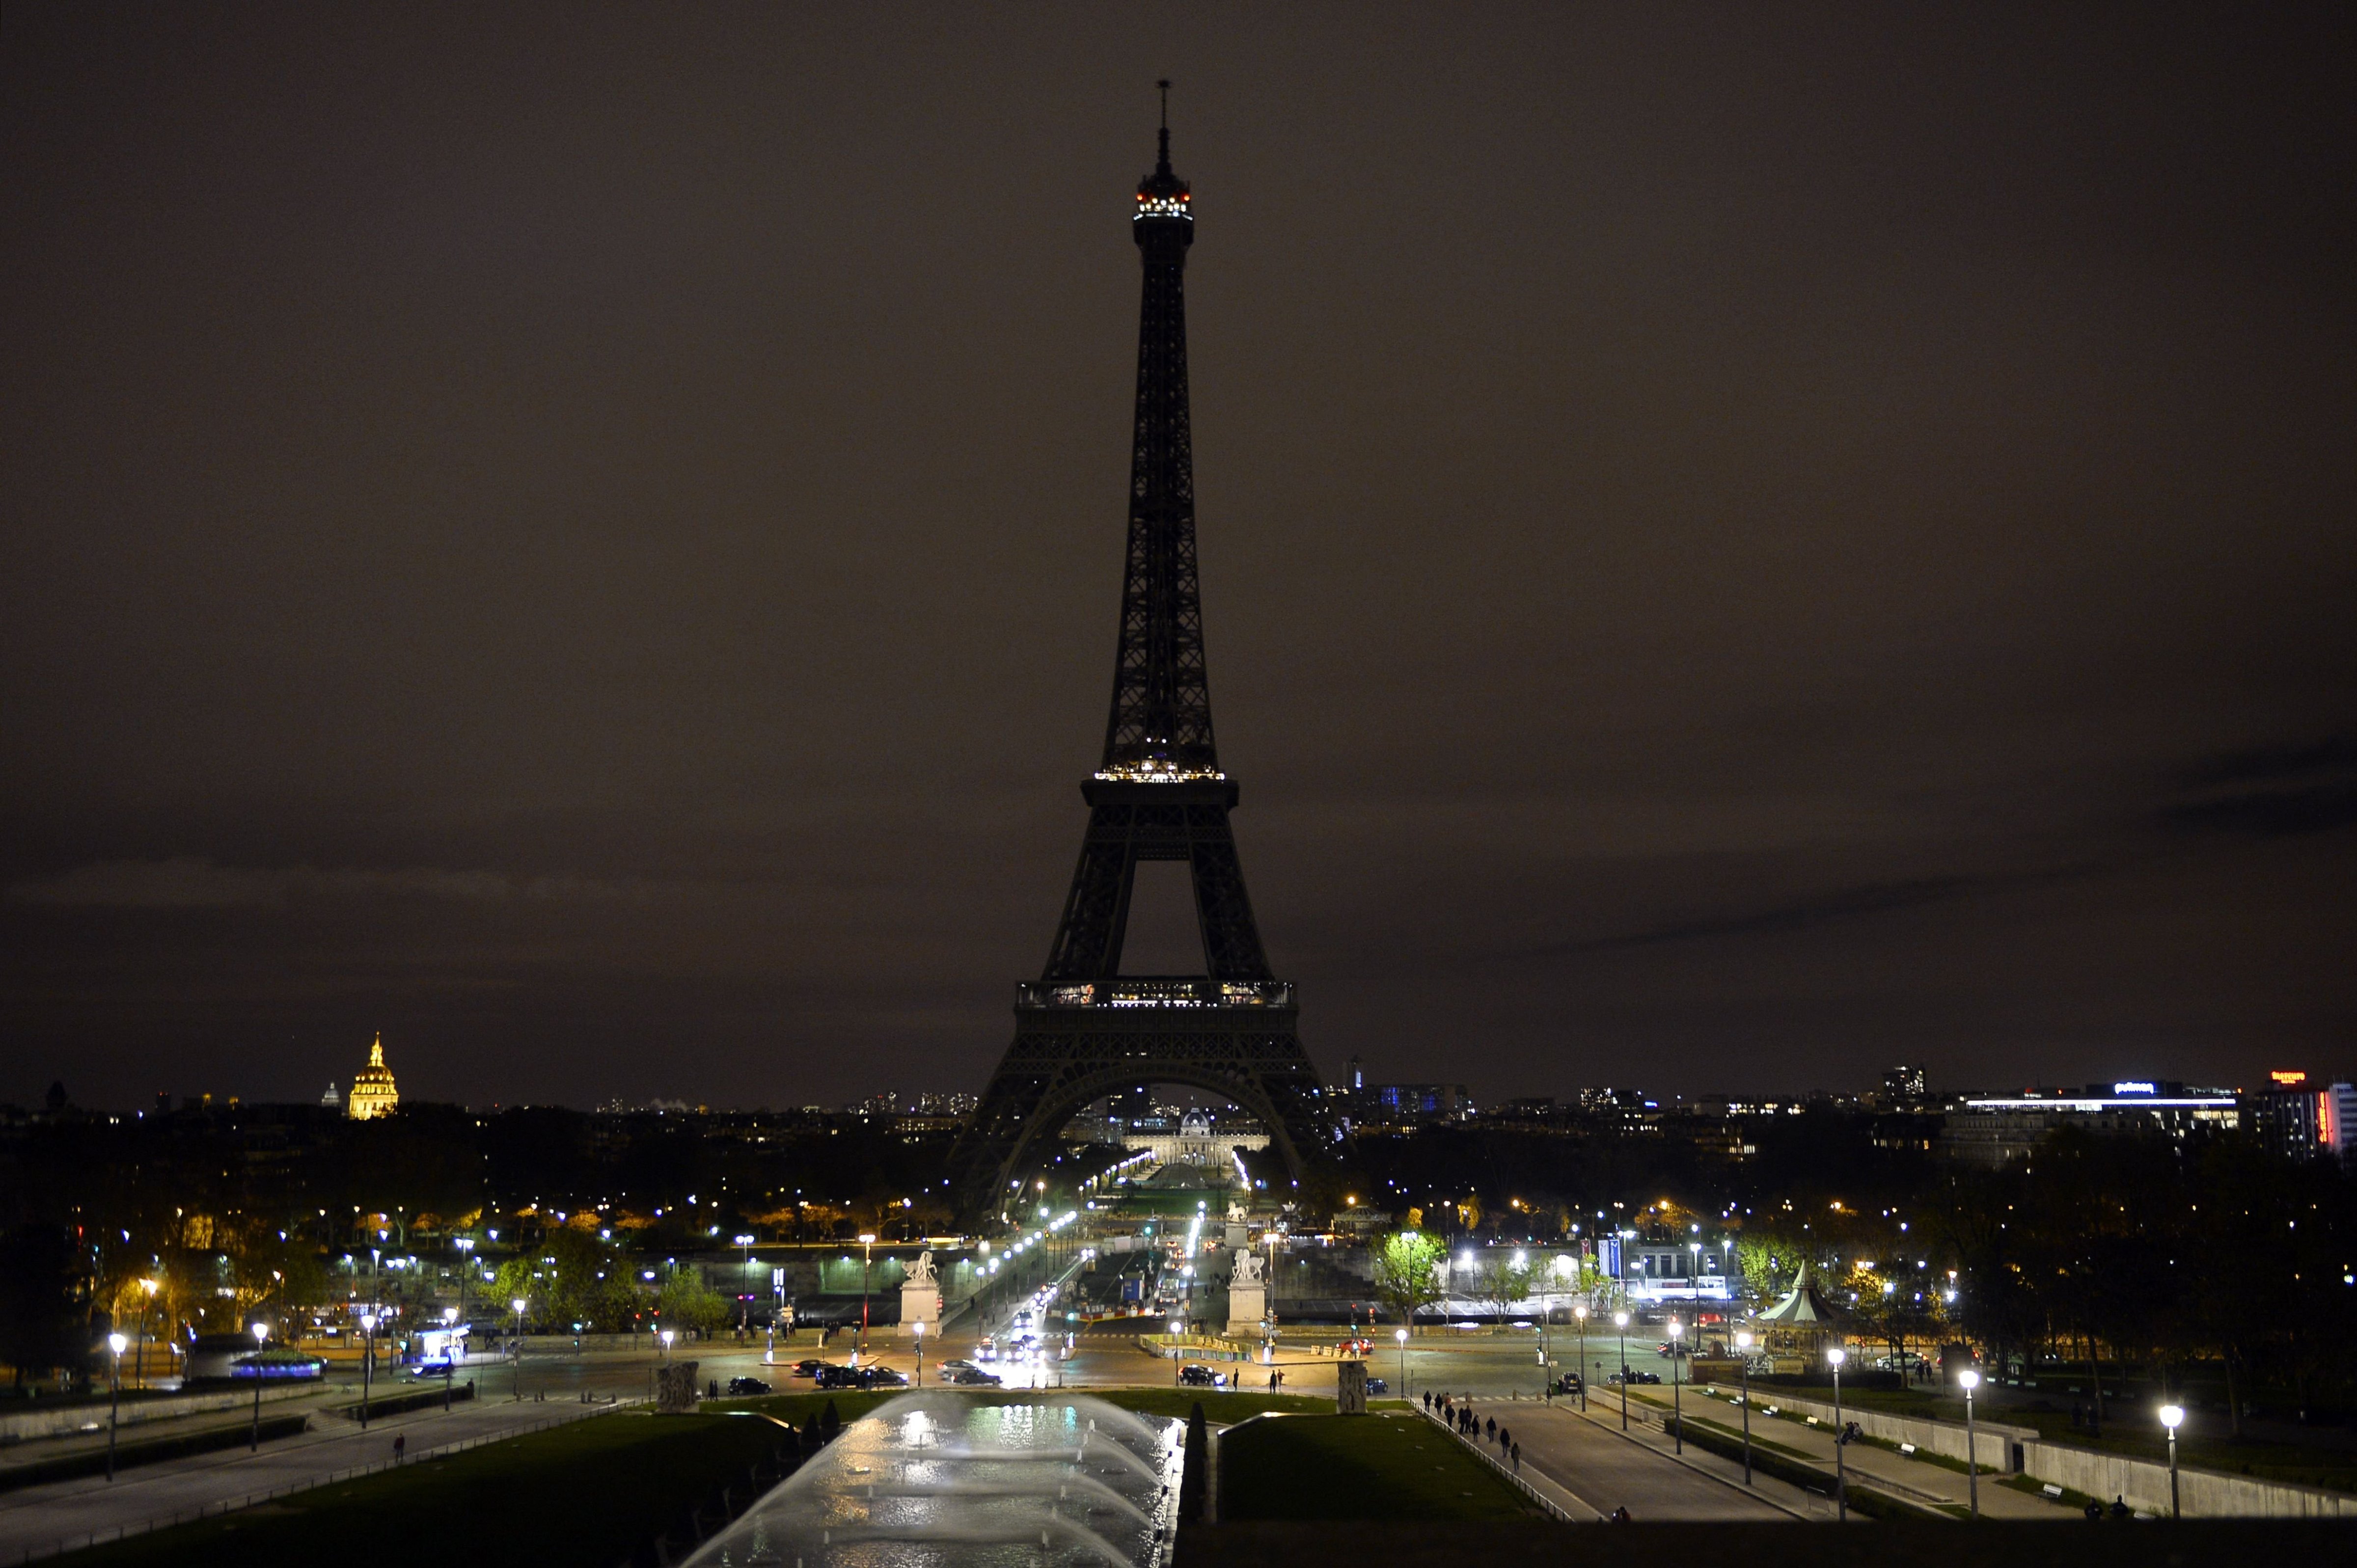 The Eiffel Tower with its lights turned off following the deadly attacks in Paris on Nov. 14, 2015. (Alain Jocard—AFP/Getty Images)